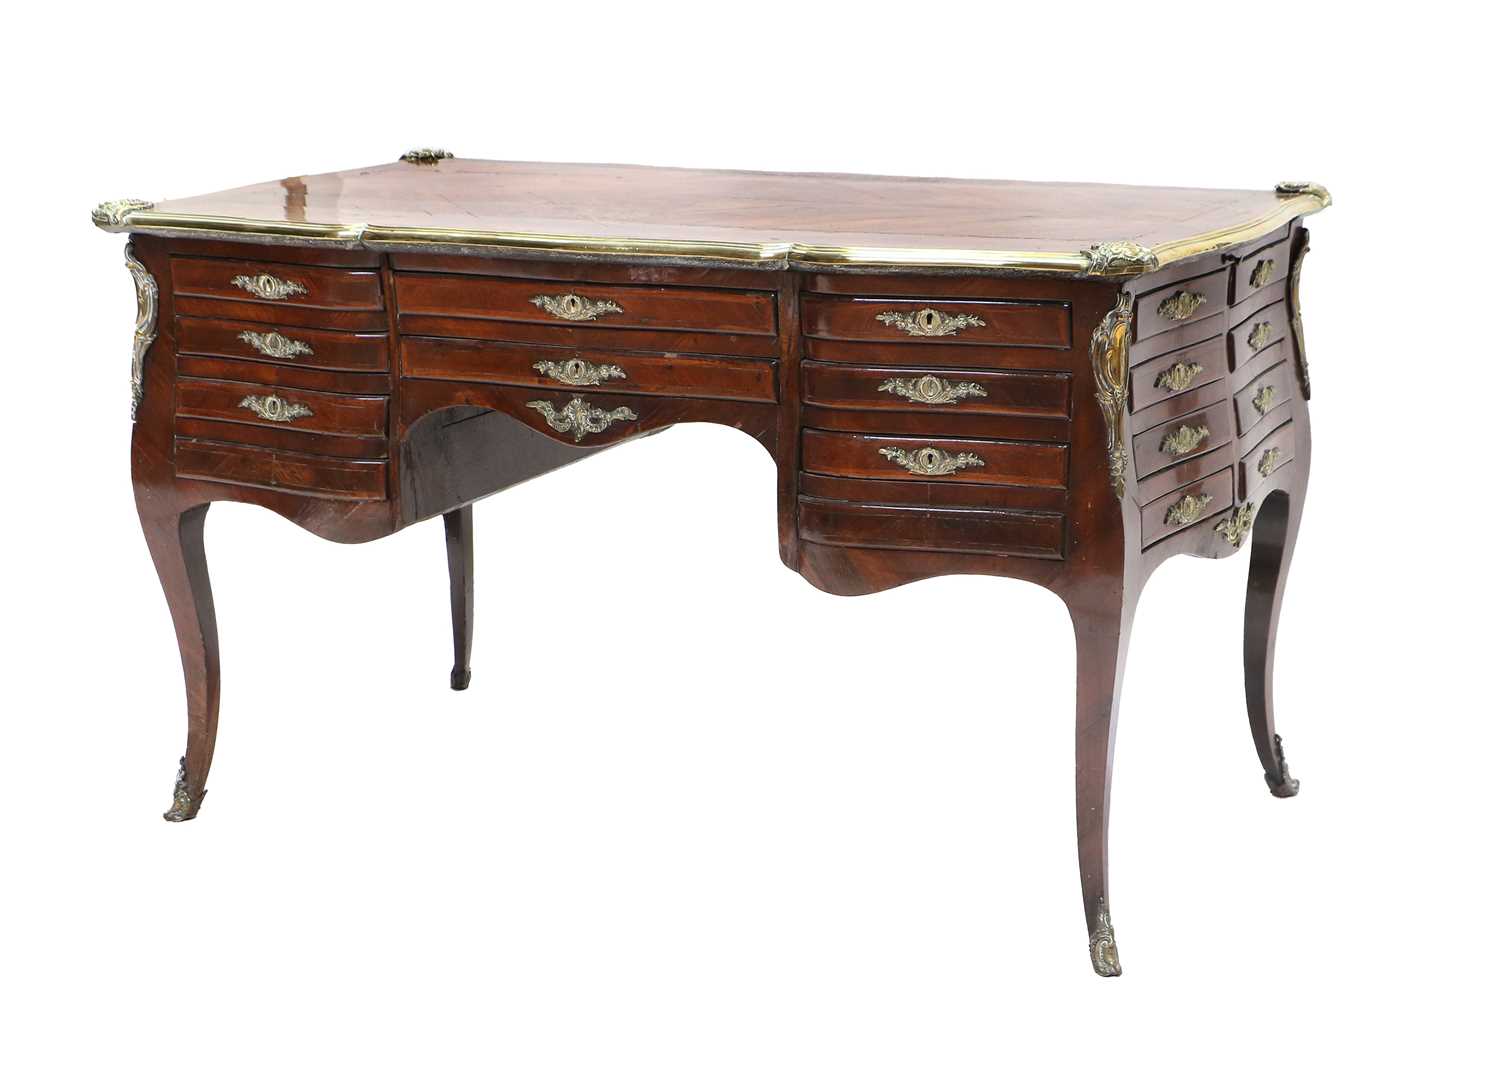 A French Louis XV-Style Kingwood and Gilt-Metal-Mounted Writing Desk, circa 1900, the crossbanded